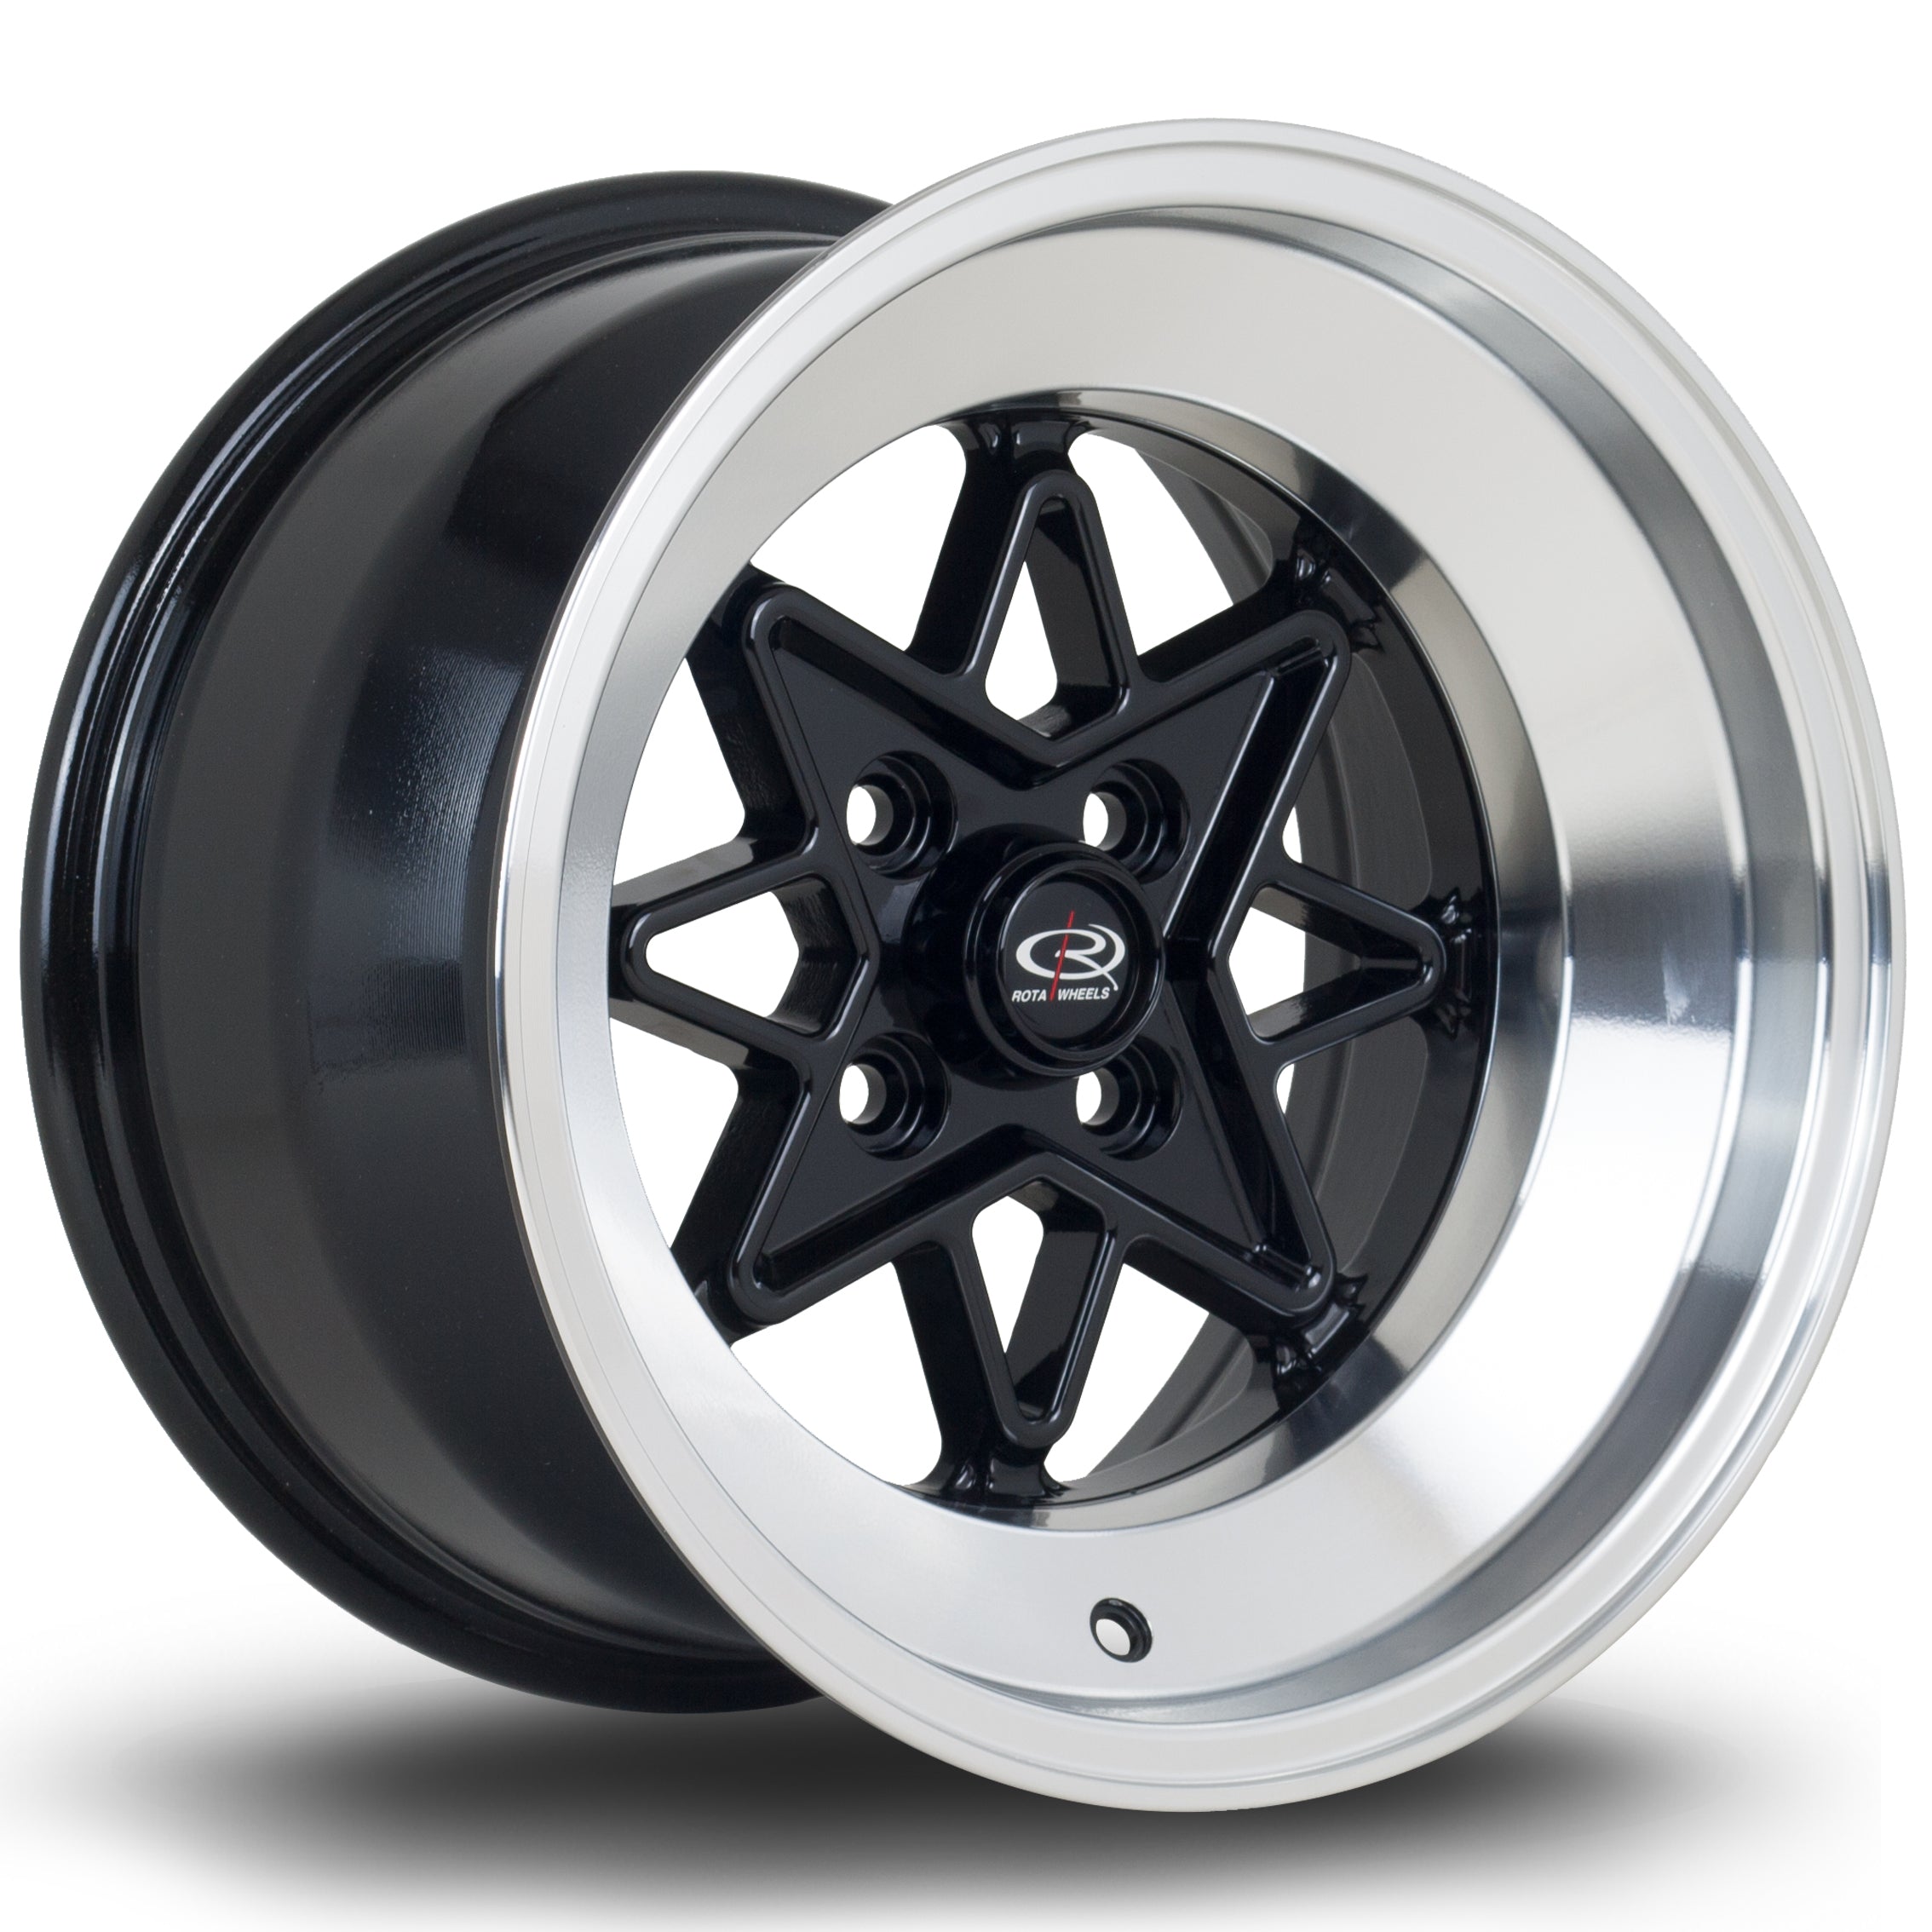 Rota Hachi, 15 x 9 inch, 4100 PCD, ET0, Gloss Black with Polished